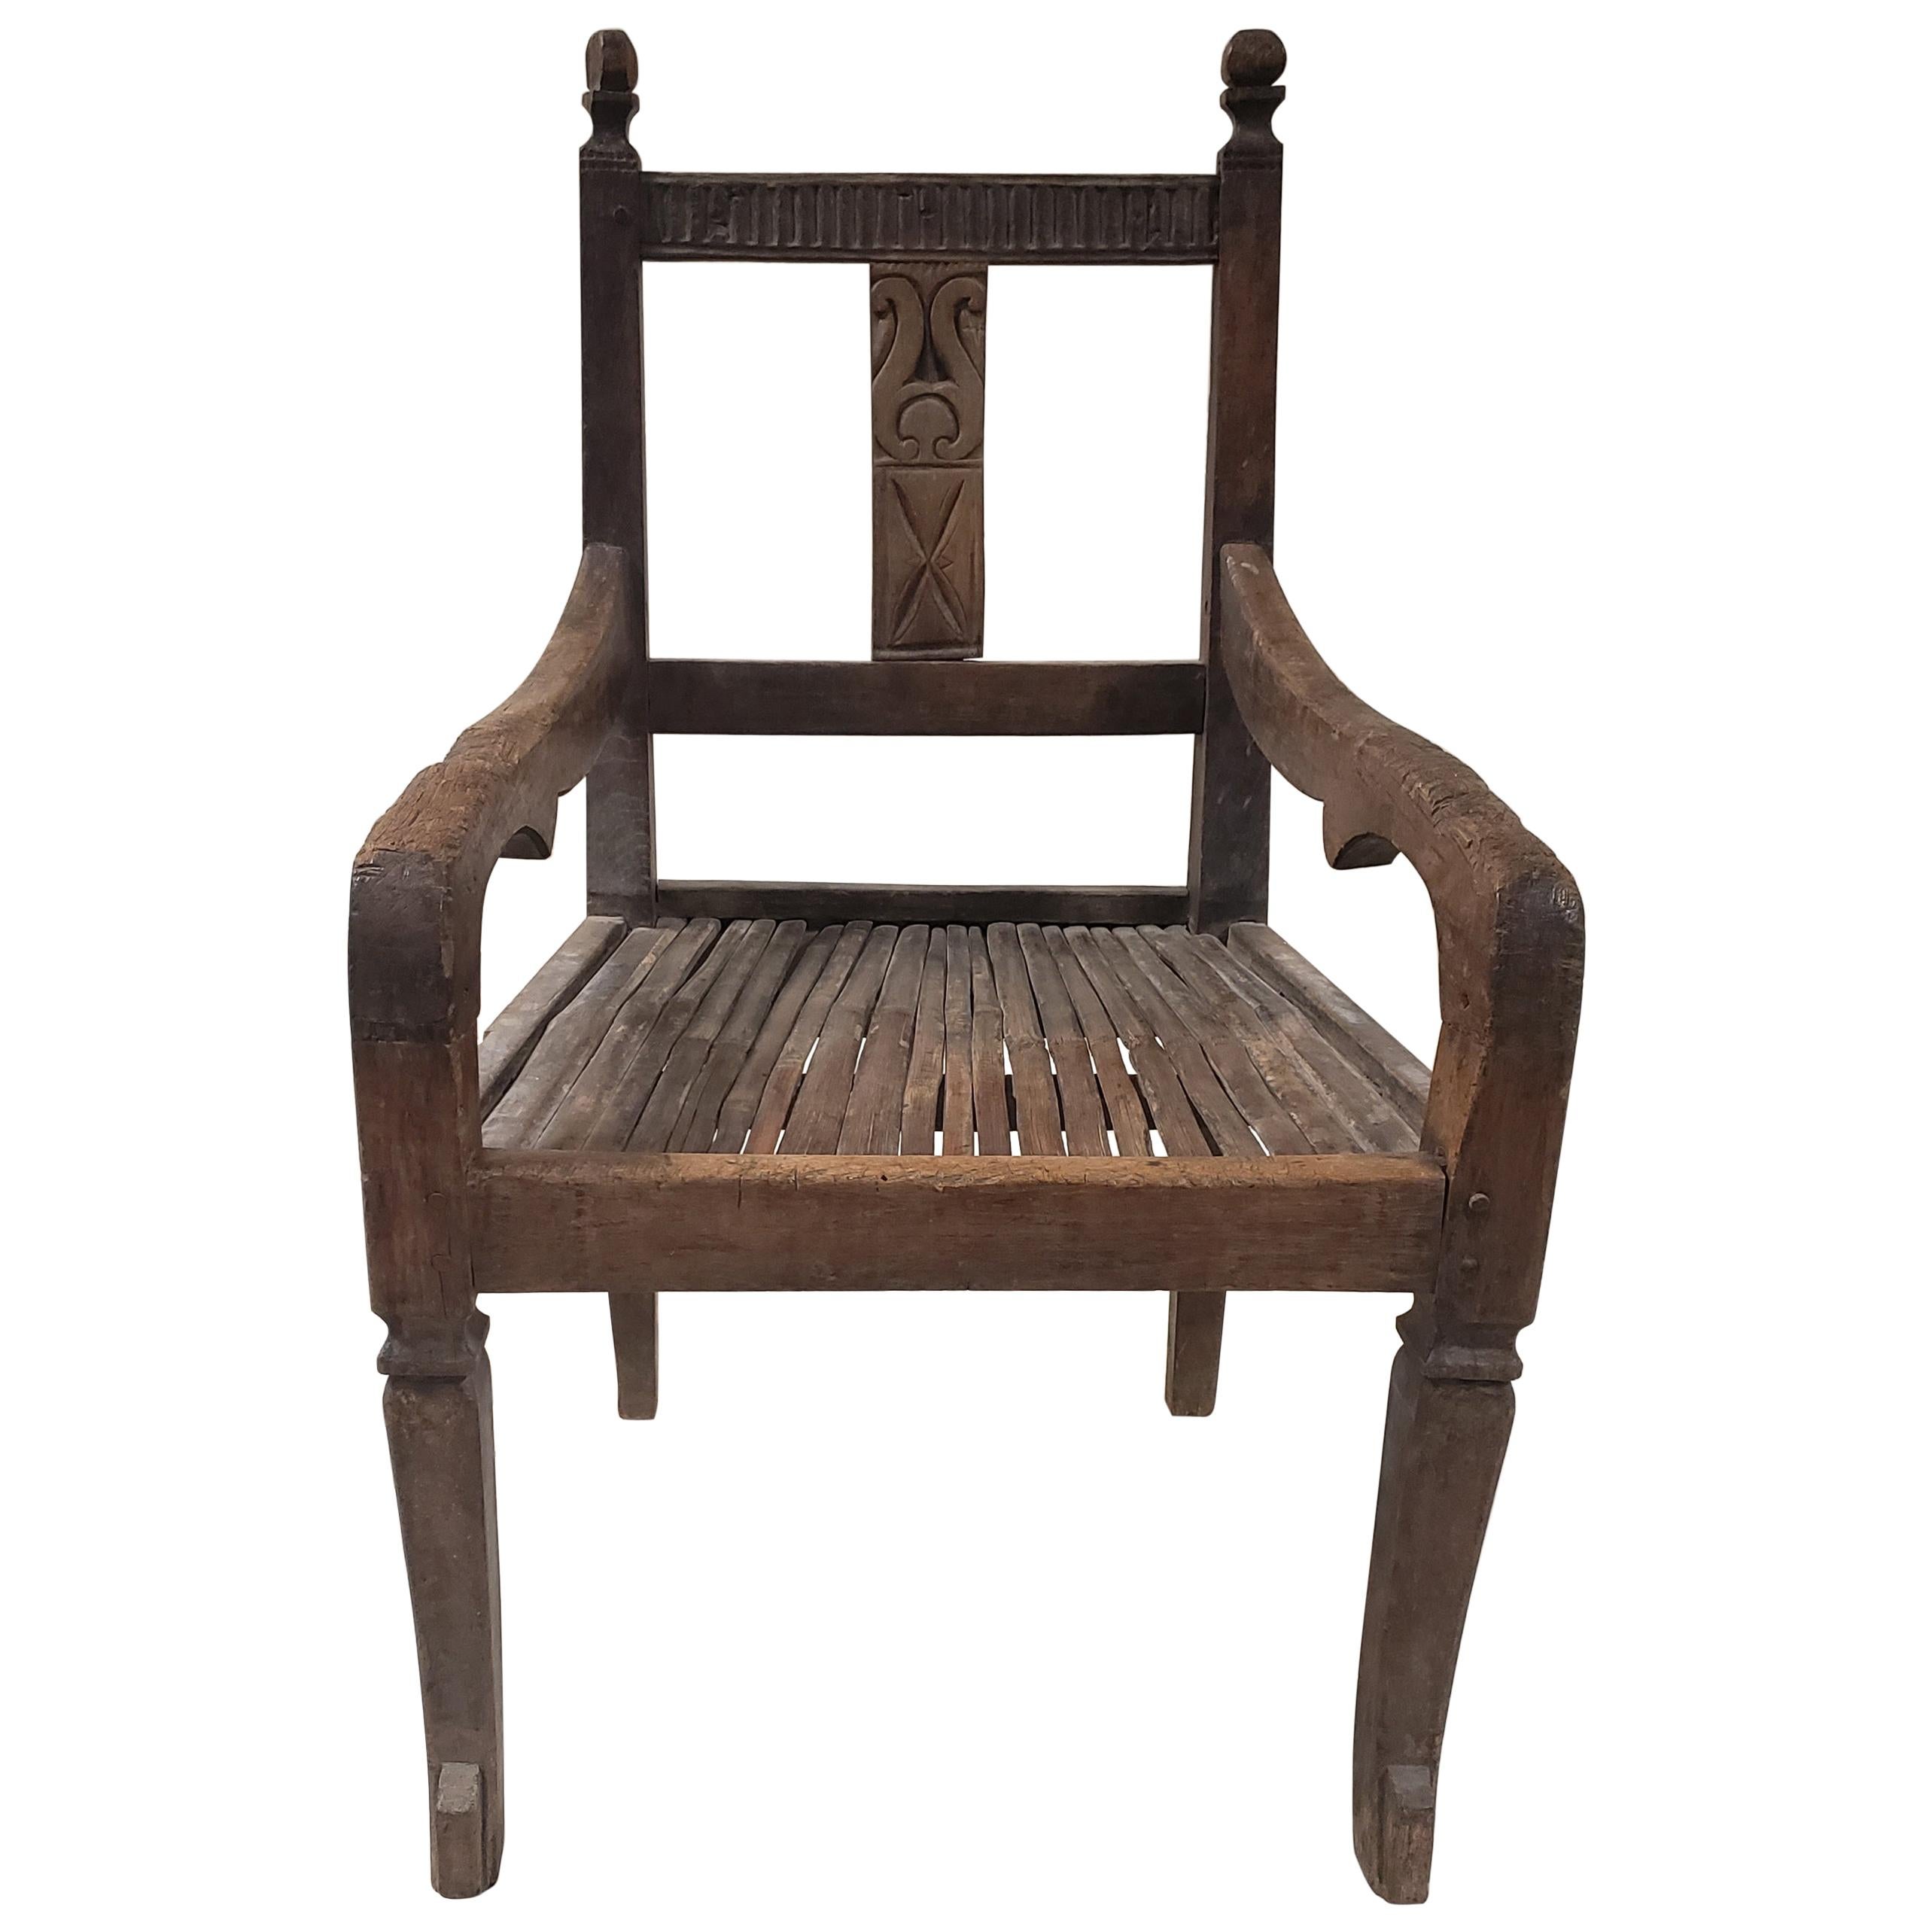 19th Century Balinese Throne Chair with Cane Seat